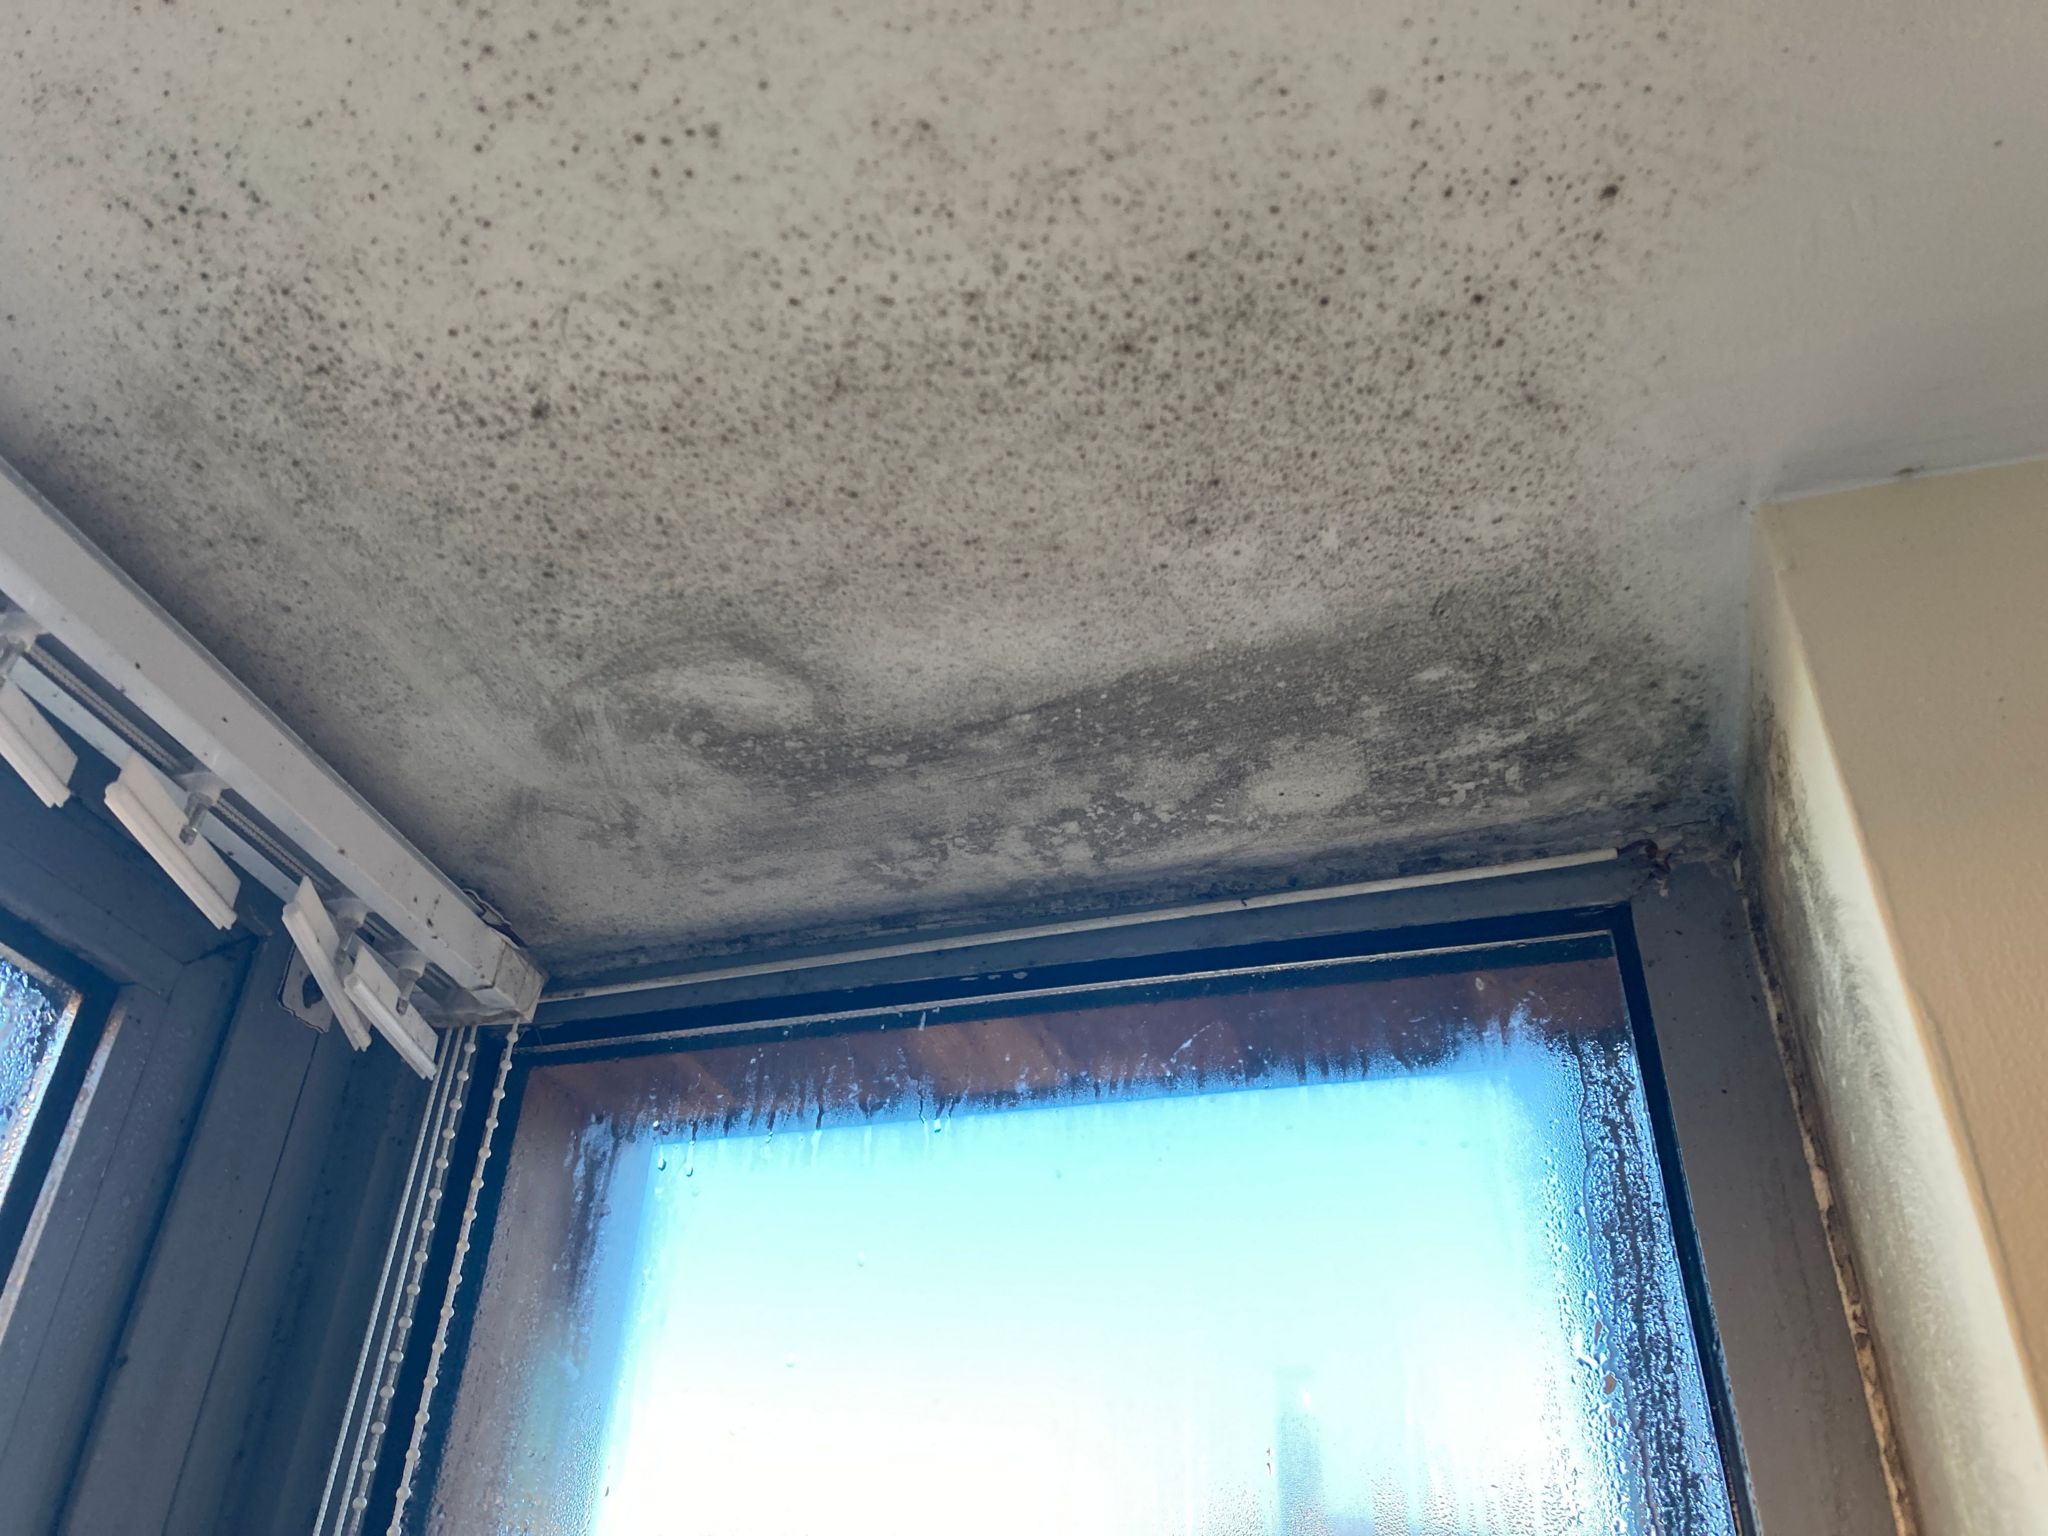 Ceiling covered in black mould